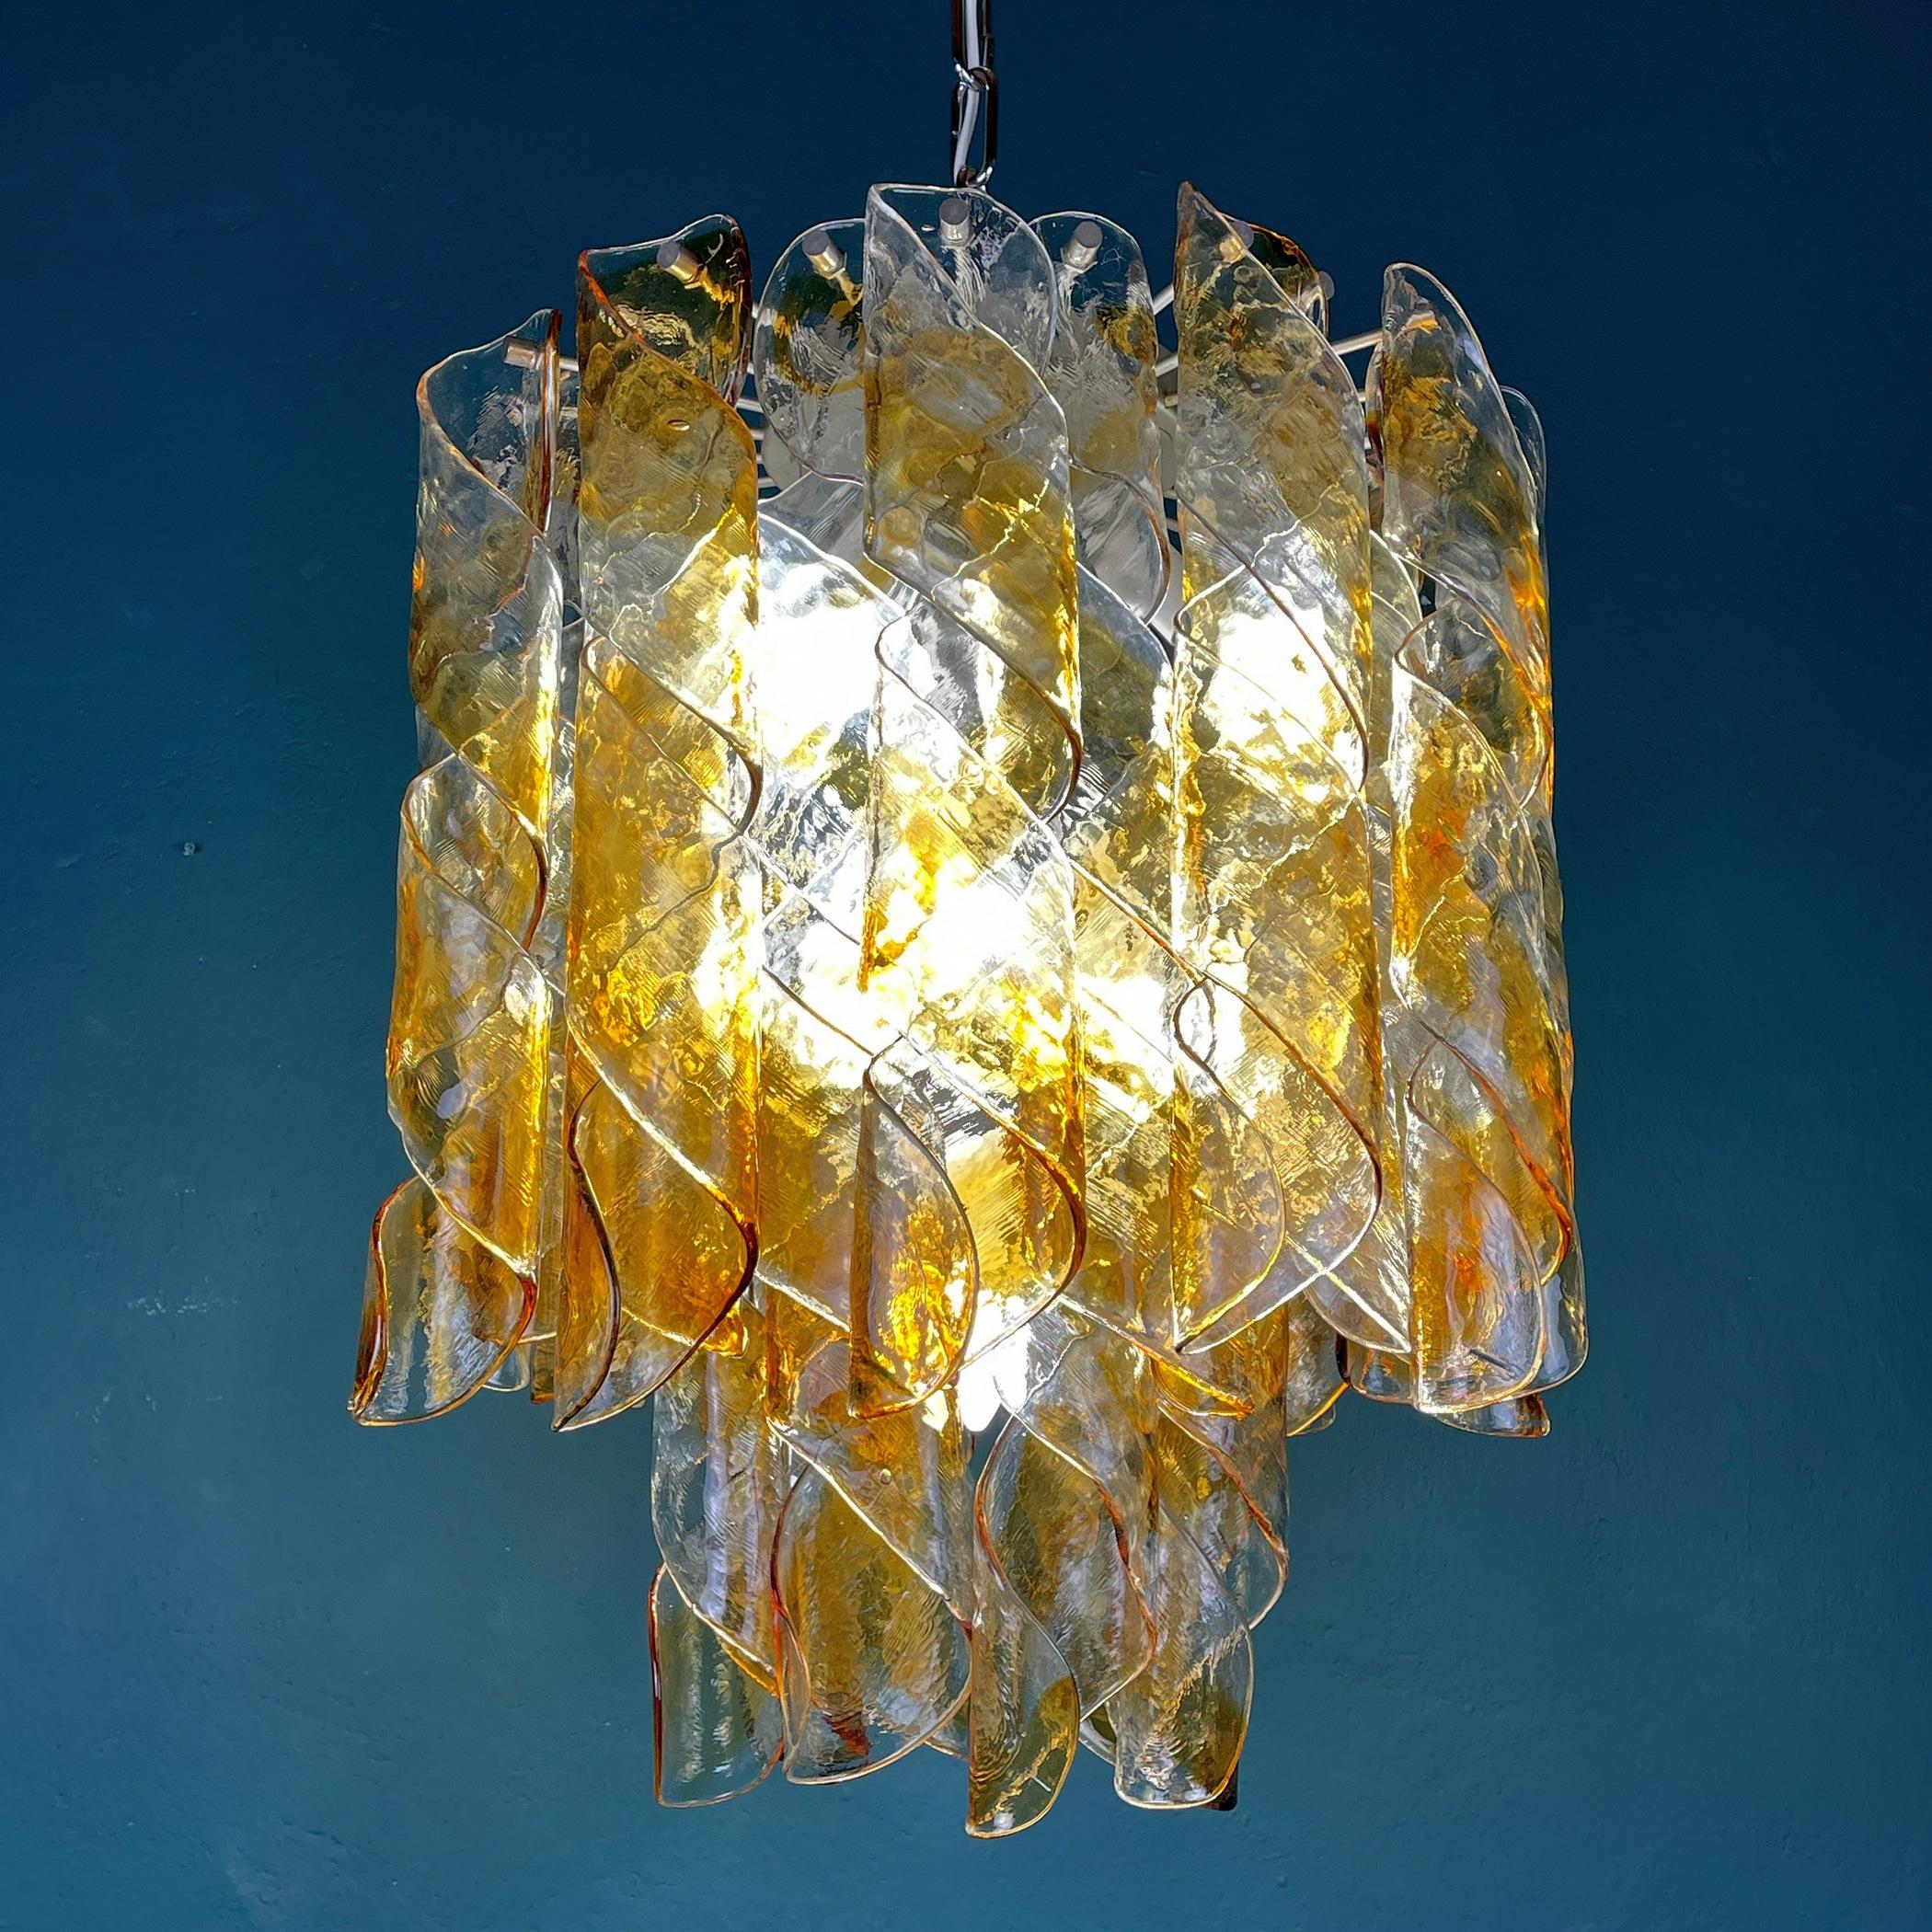 Gorgeous rare Murano glass chandelier by AV Mazzega made in Italy in the 1970s. Consists of 24 glass plates of Murano glass, 40 cm long, and 8 glass plates, 25 cm long made by Italian glassblowers. They follow the oldest Murano glassmaking